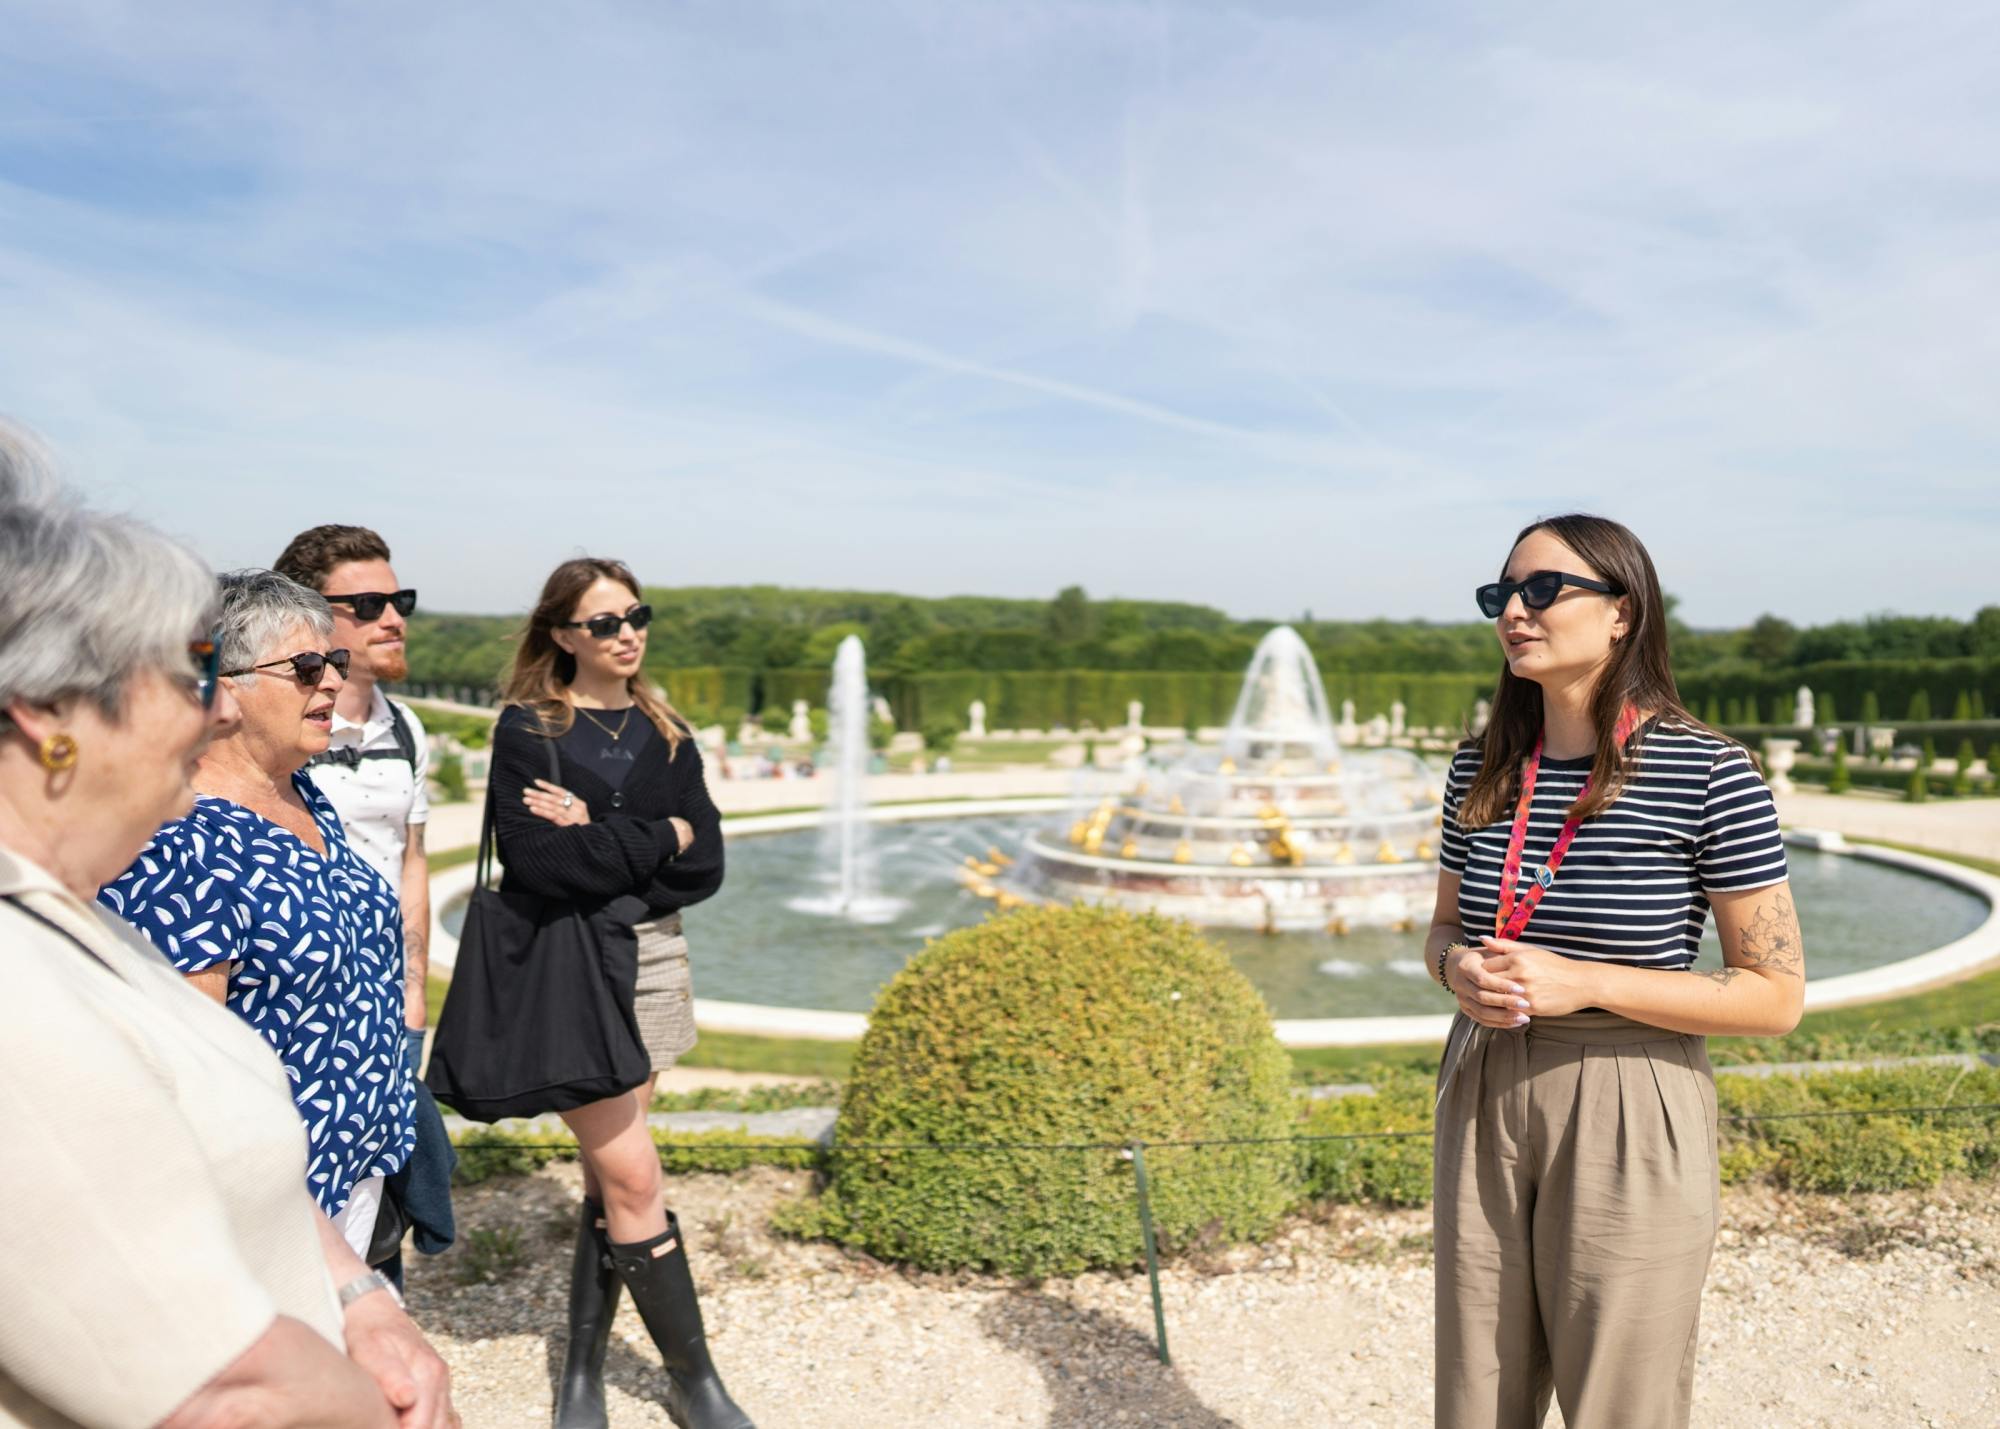 Versailles Palace & Gardens half day tour with skip the line